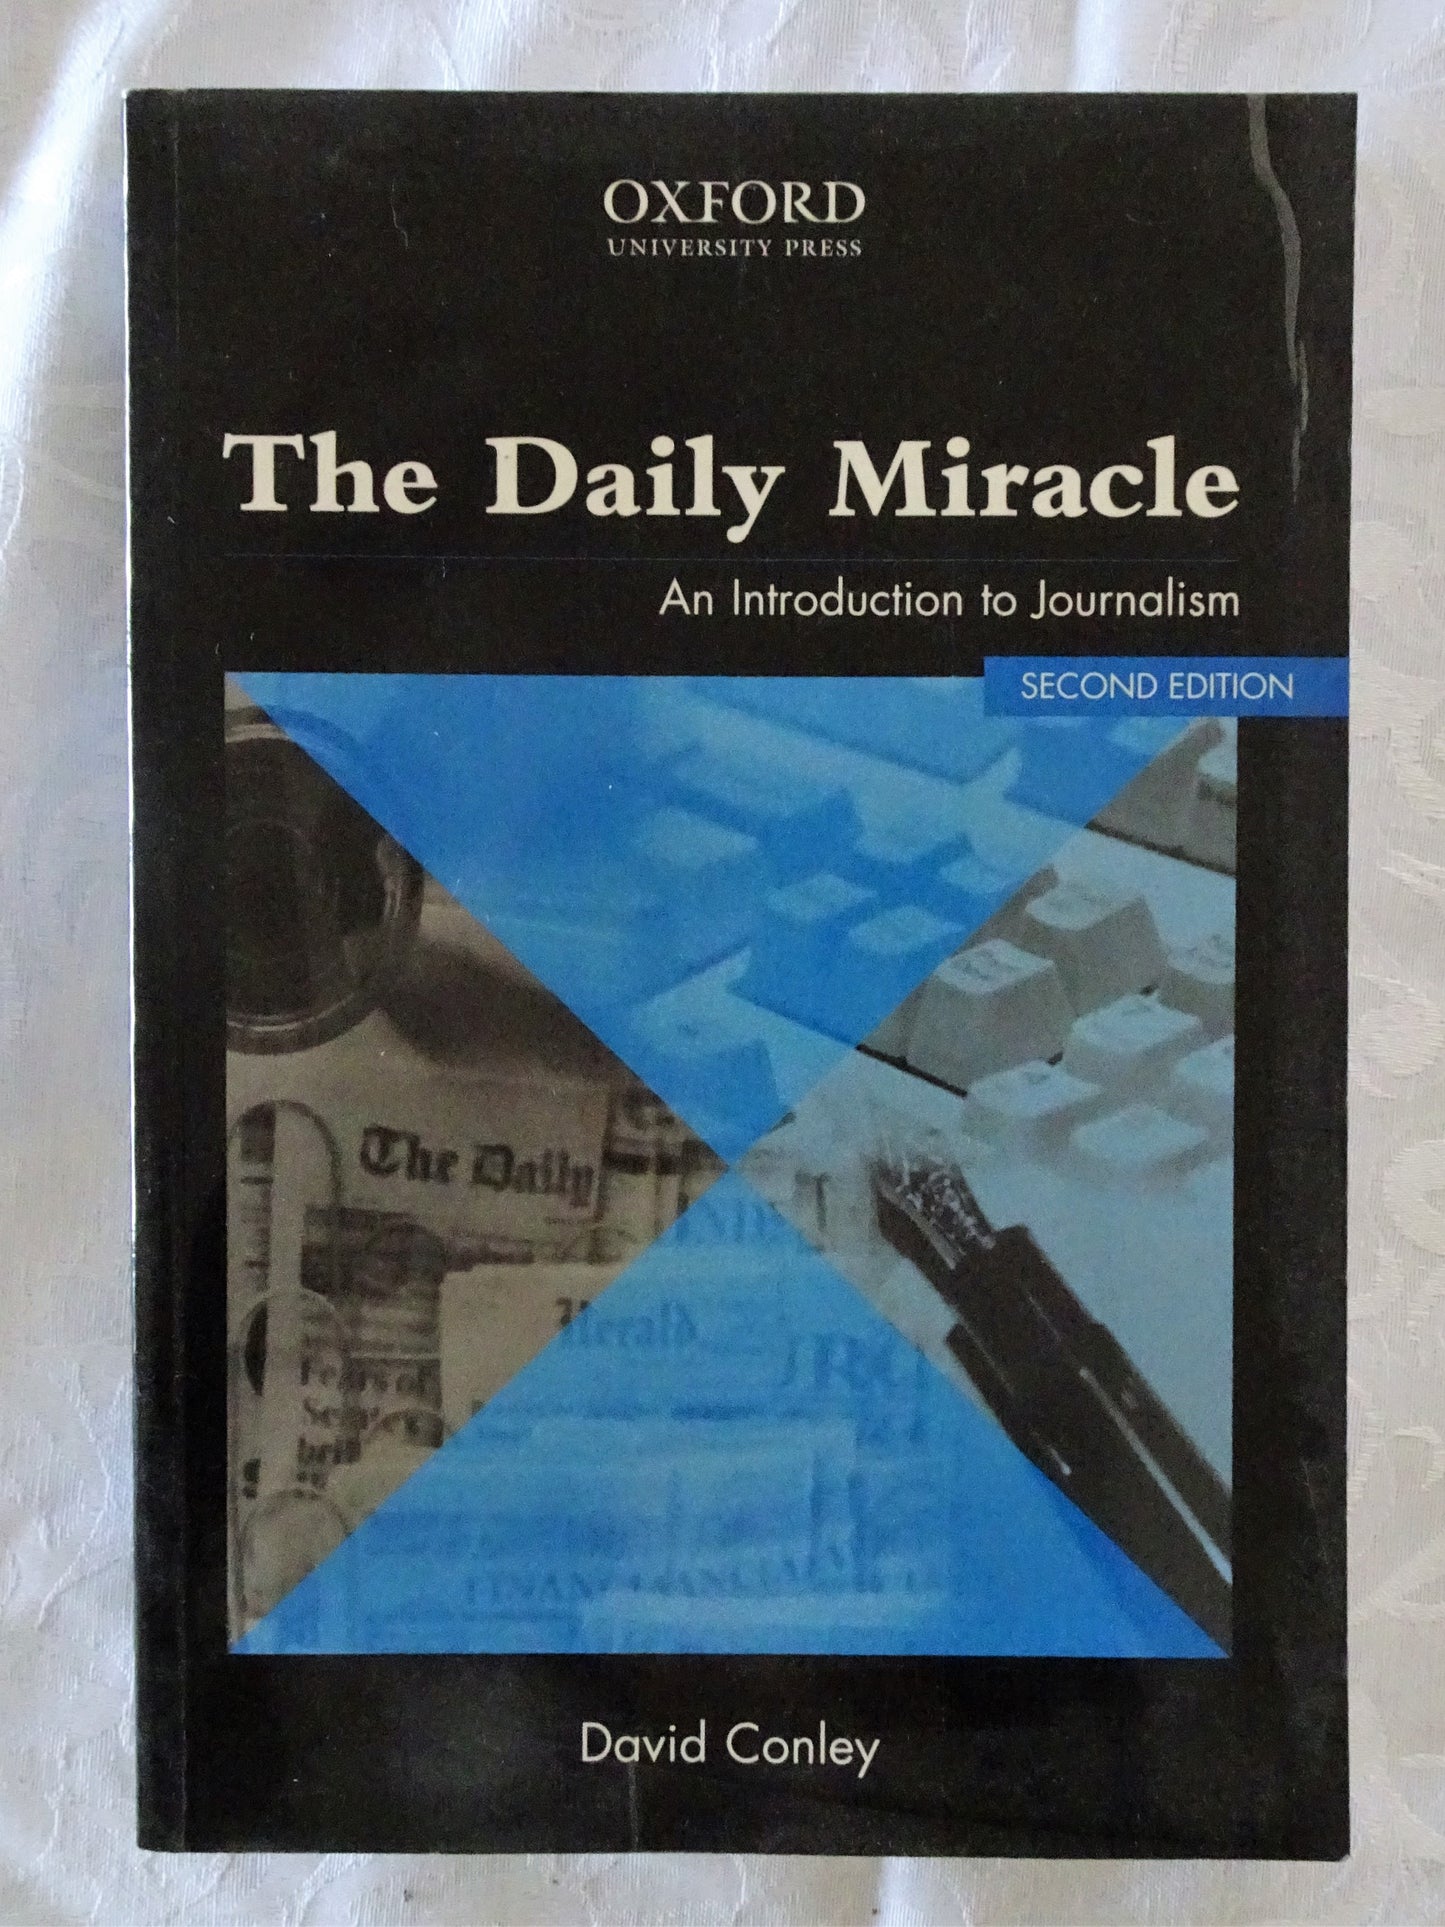 The Daily Miracle by David Conley